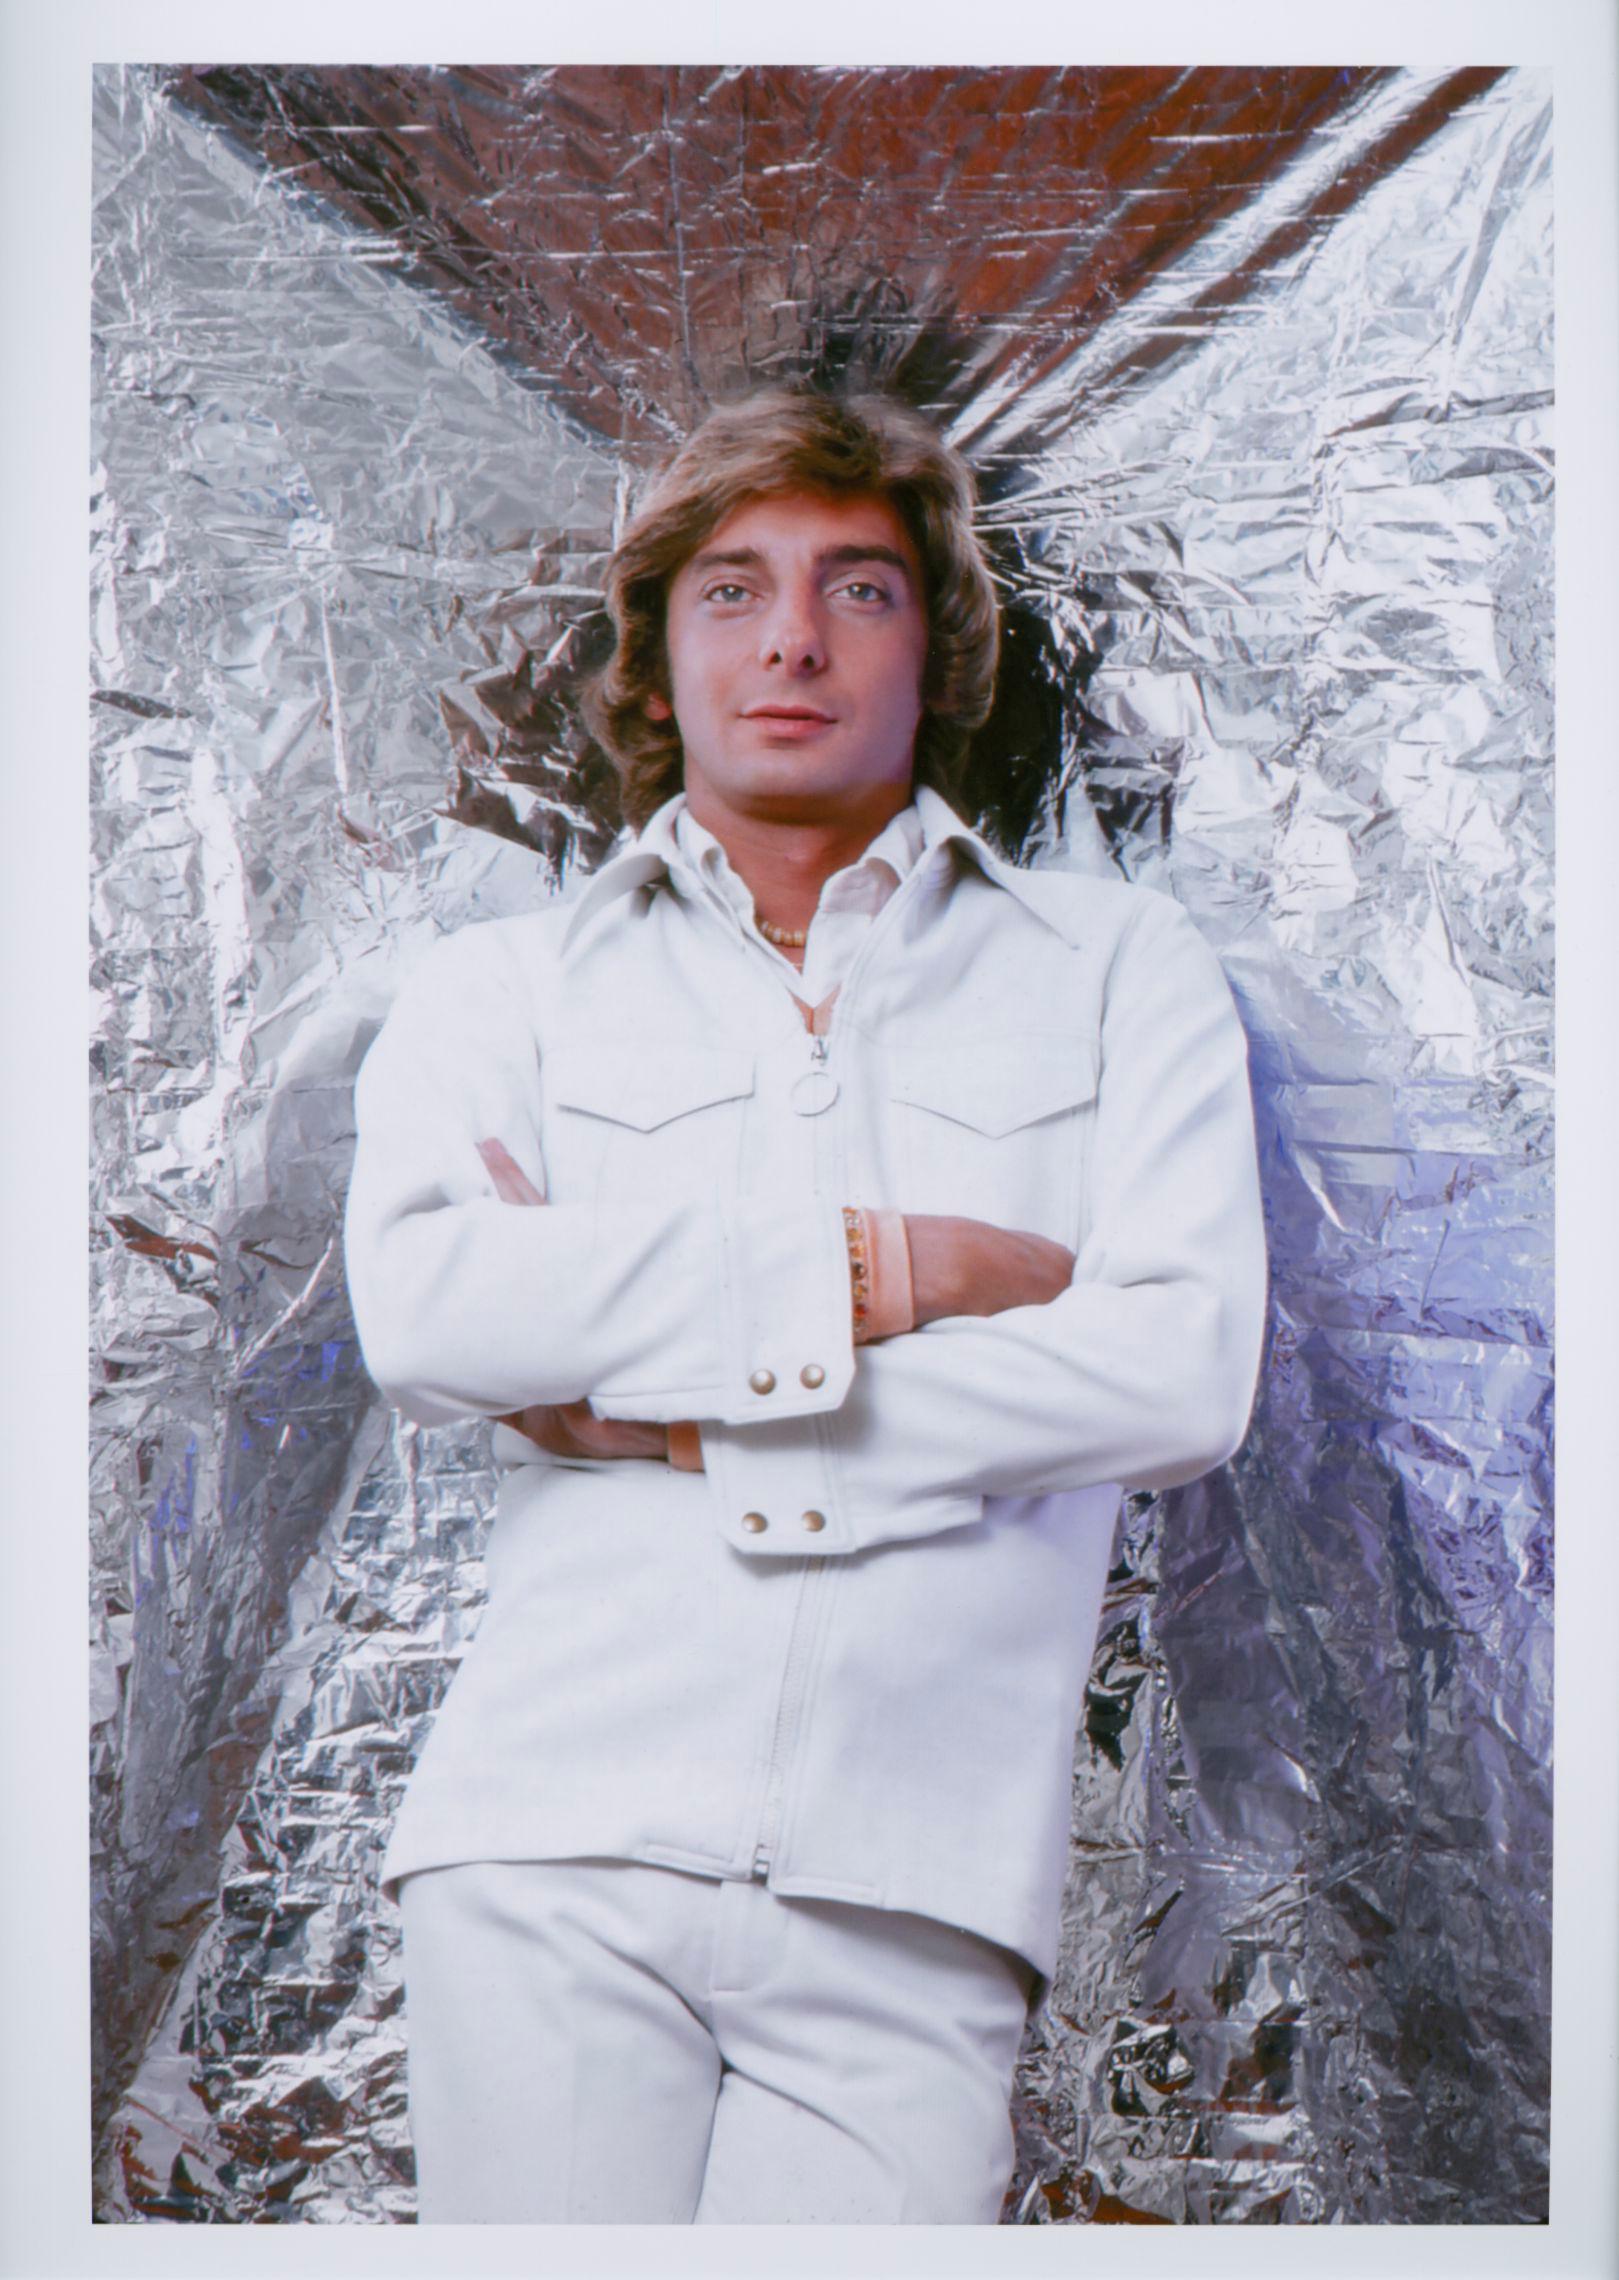 Singer/songwriter Barry Manilow, cover shot for "After Dark" magazine  